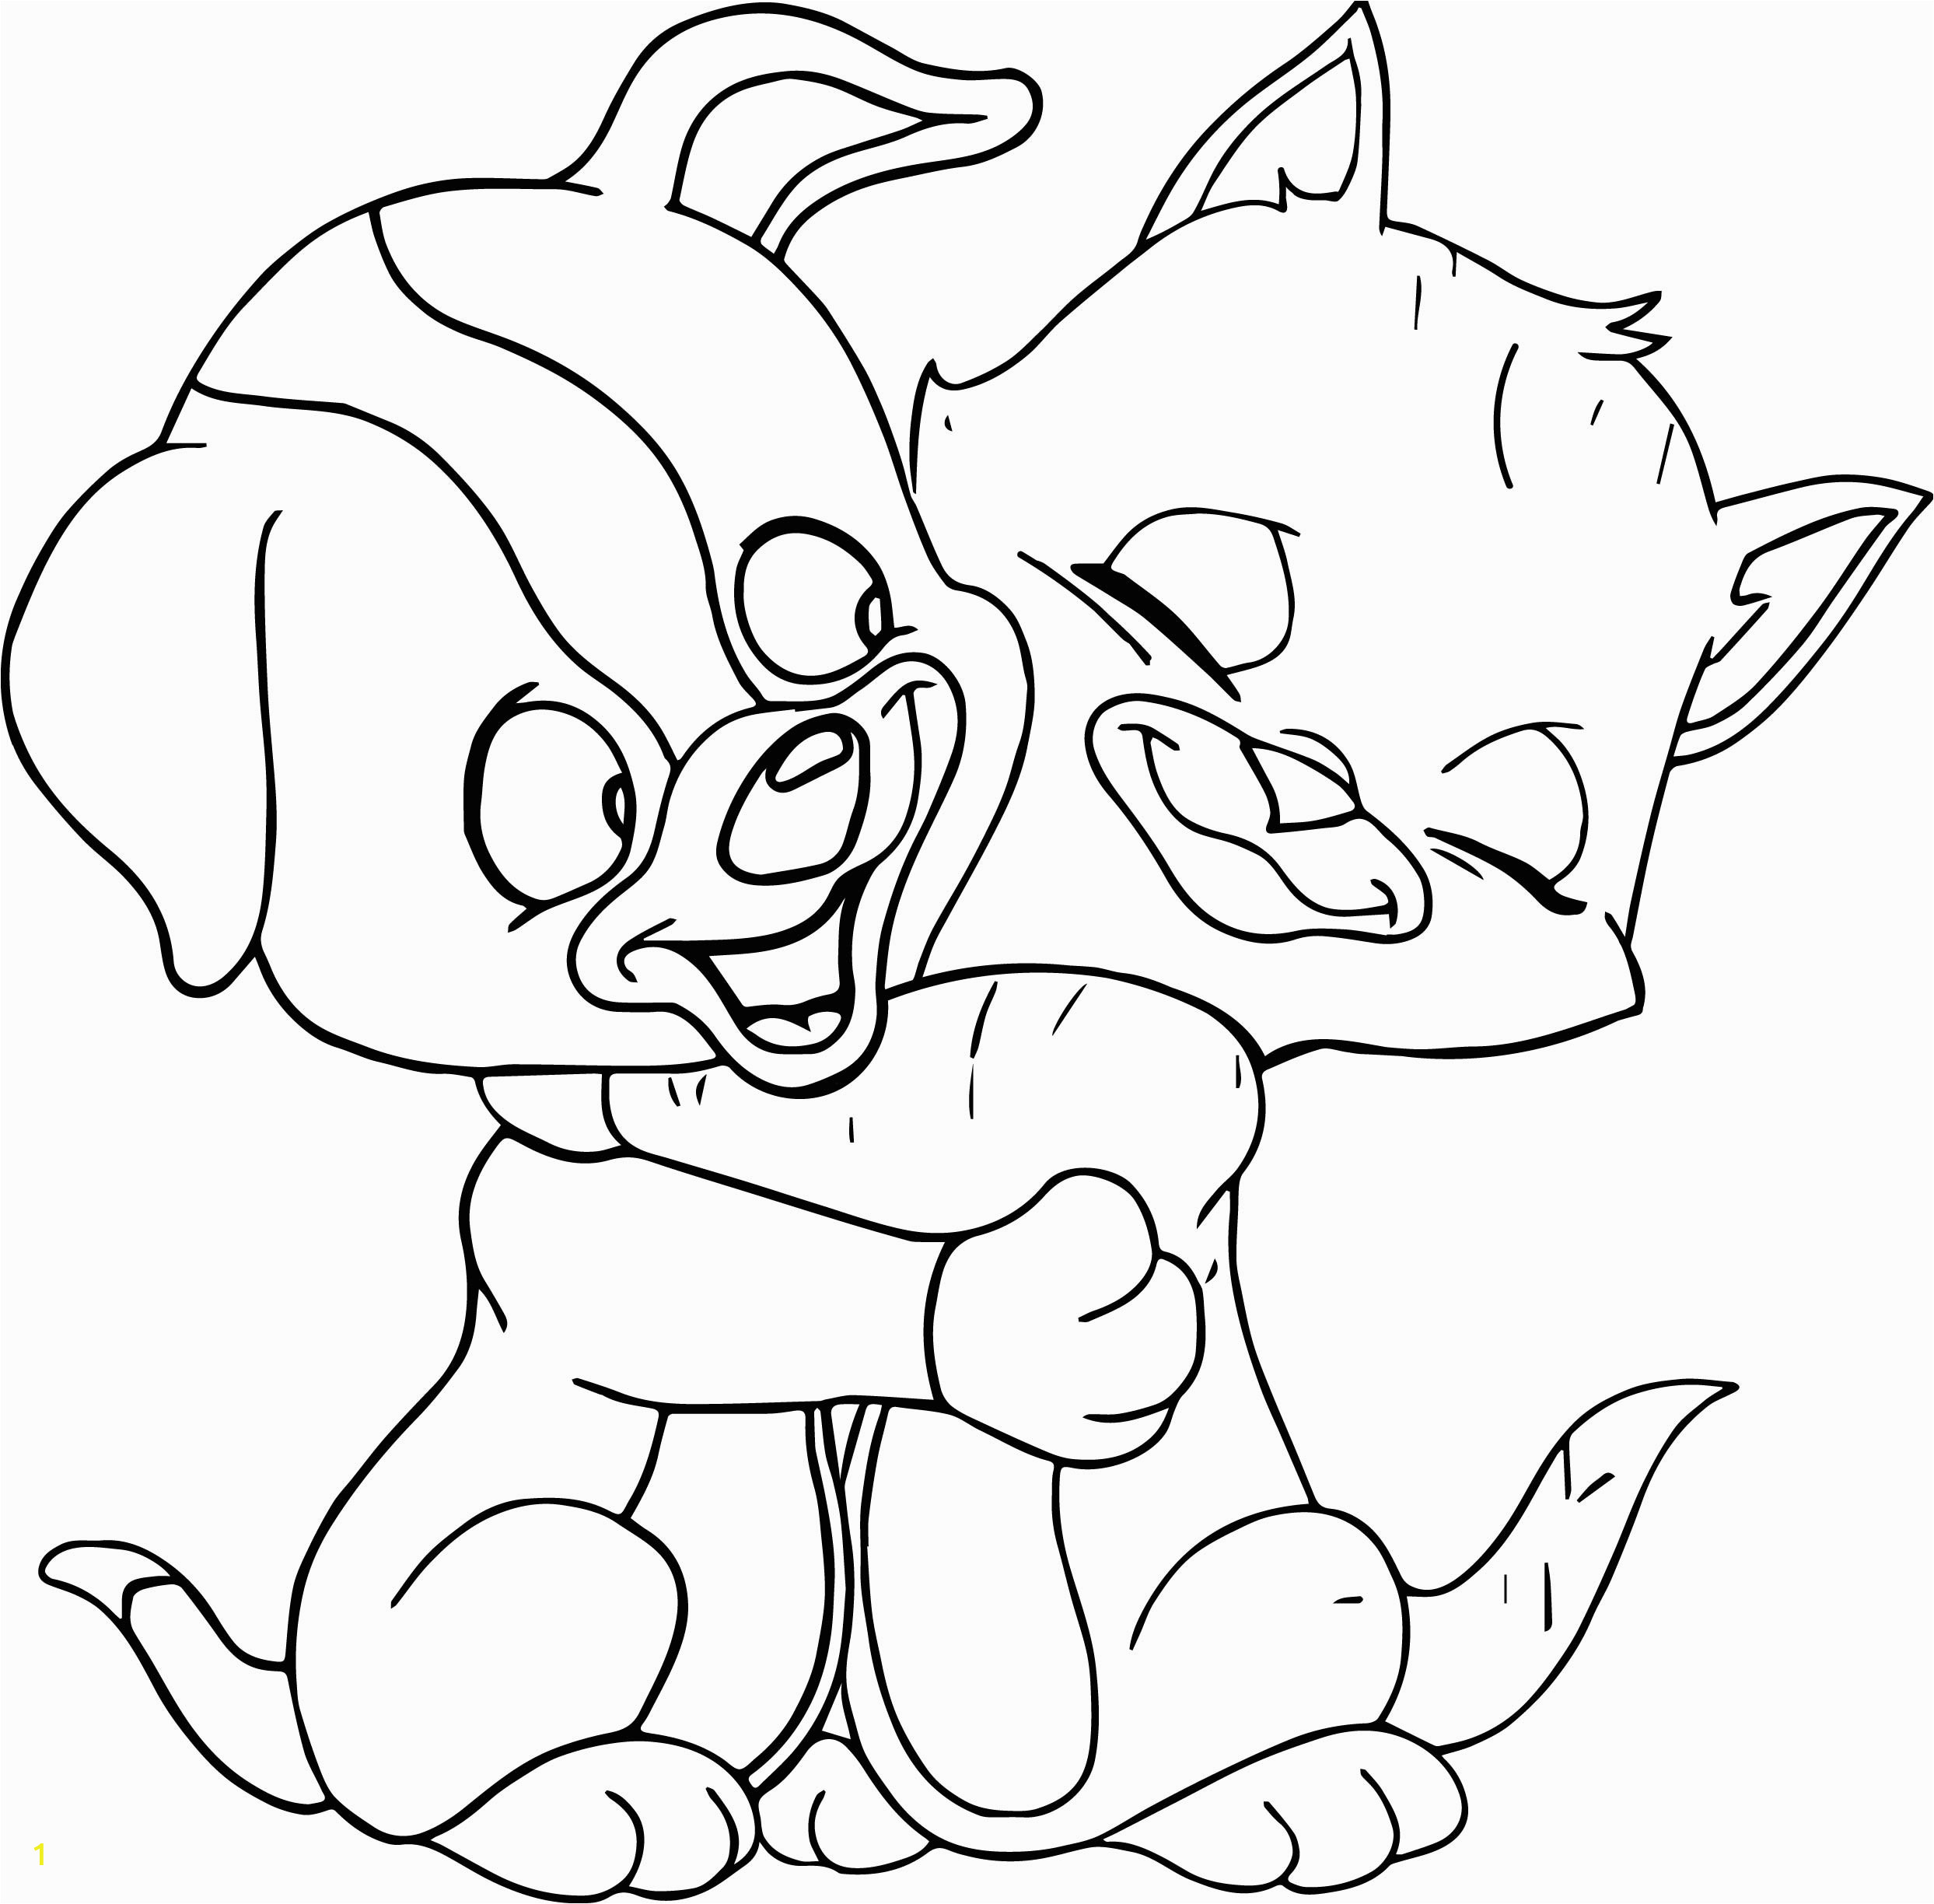 Printable Coloring Pages Dogs and Cats Catdog Coloring Pages at Getcolorings